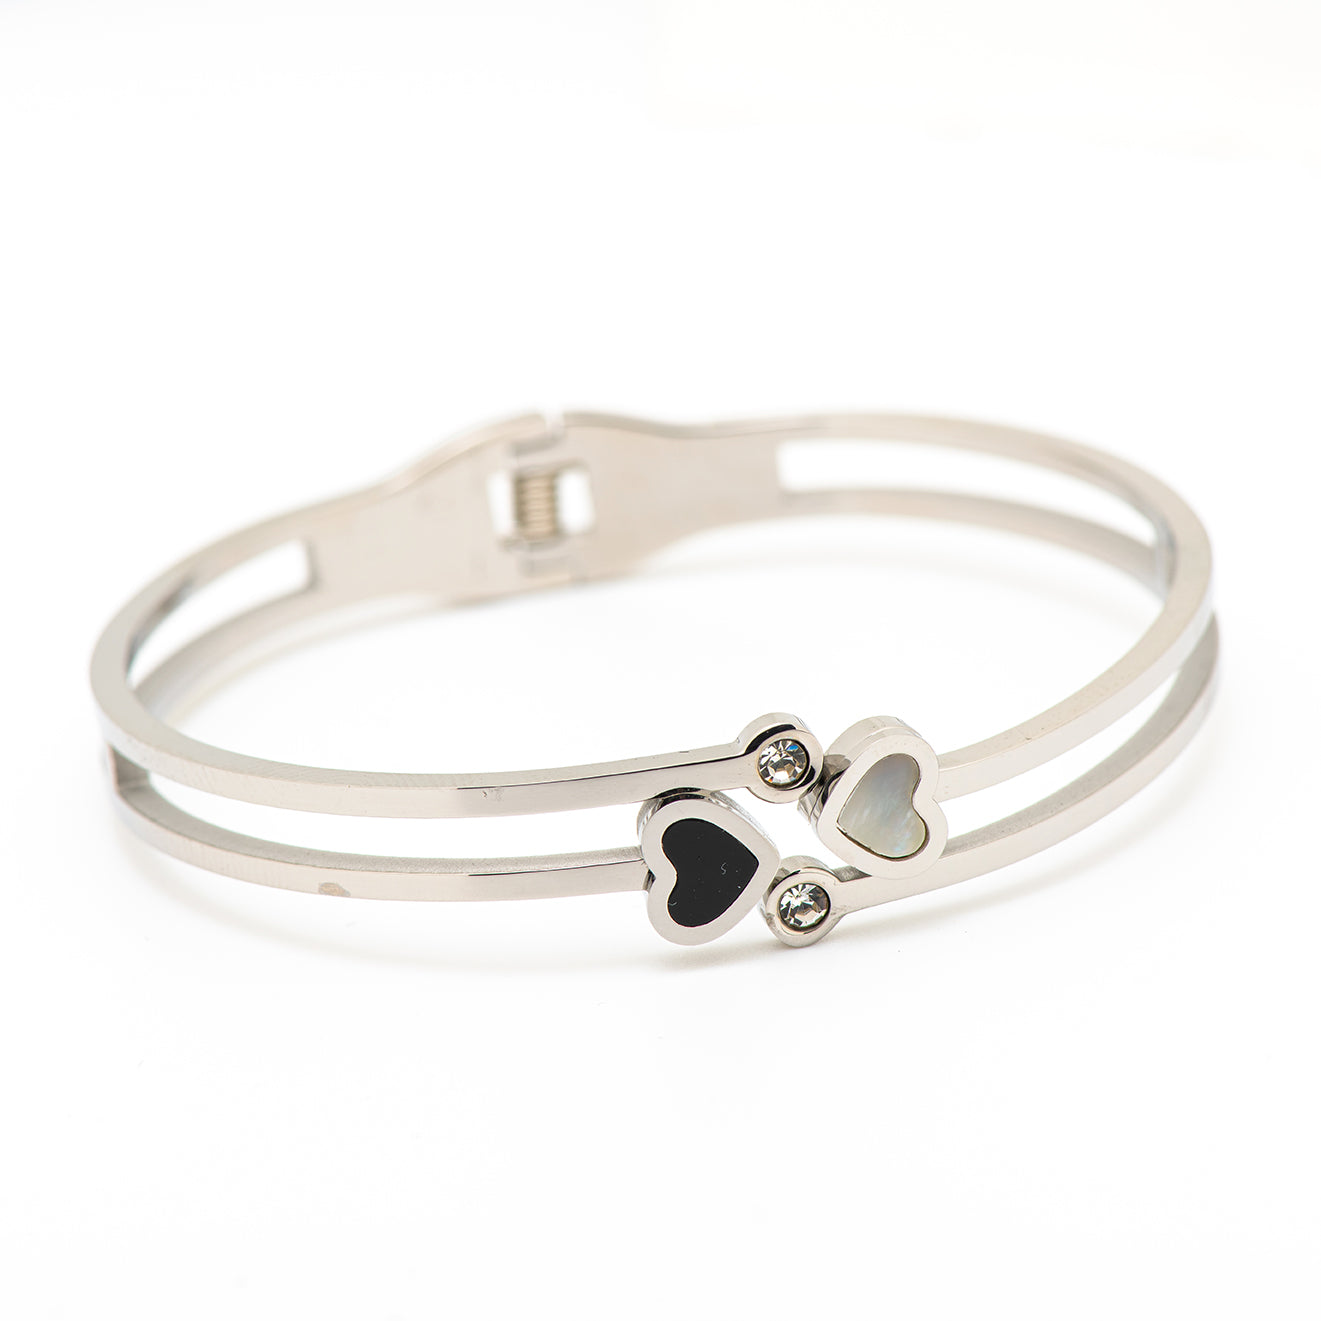 stainless steel bangle with 2 hearts.